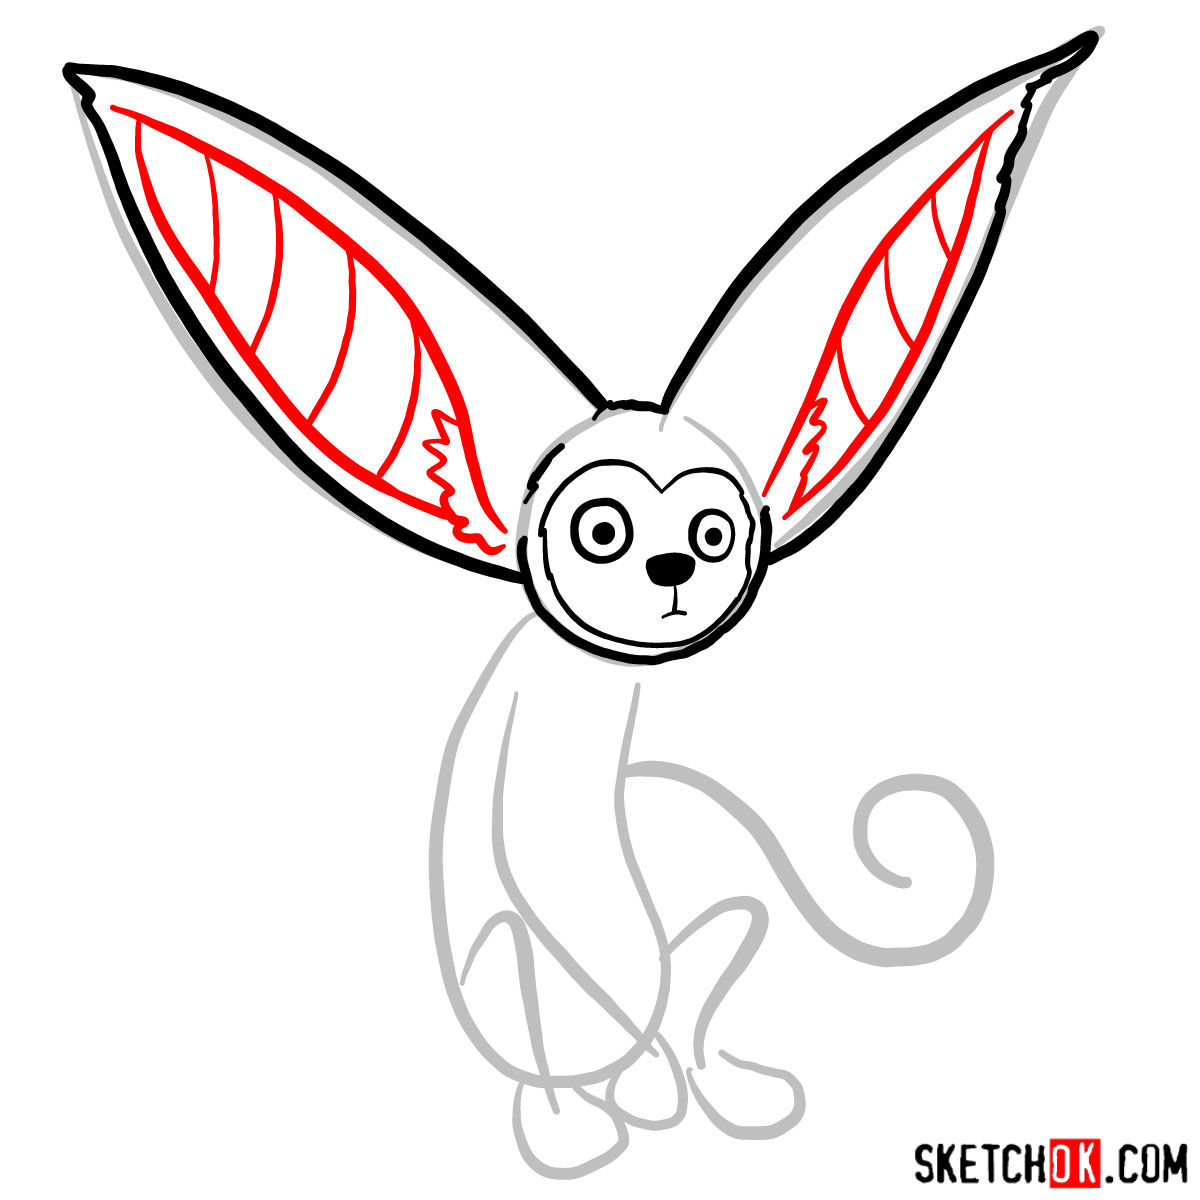 Step-by-step drawing guide of Momo the winged limur.